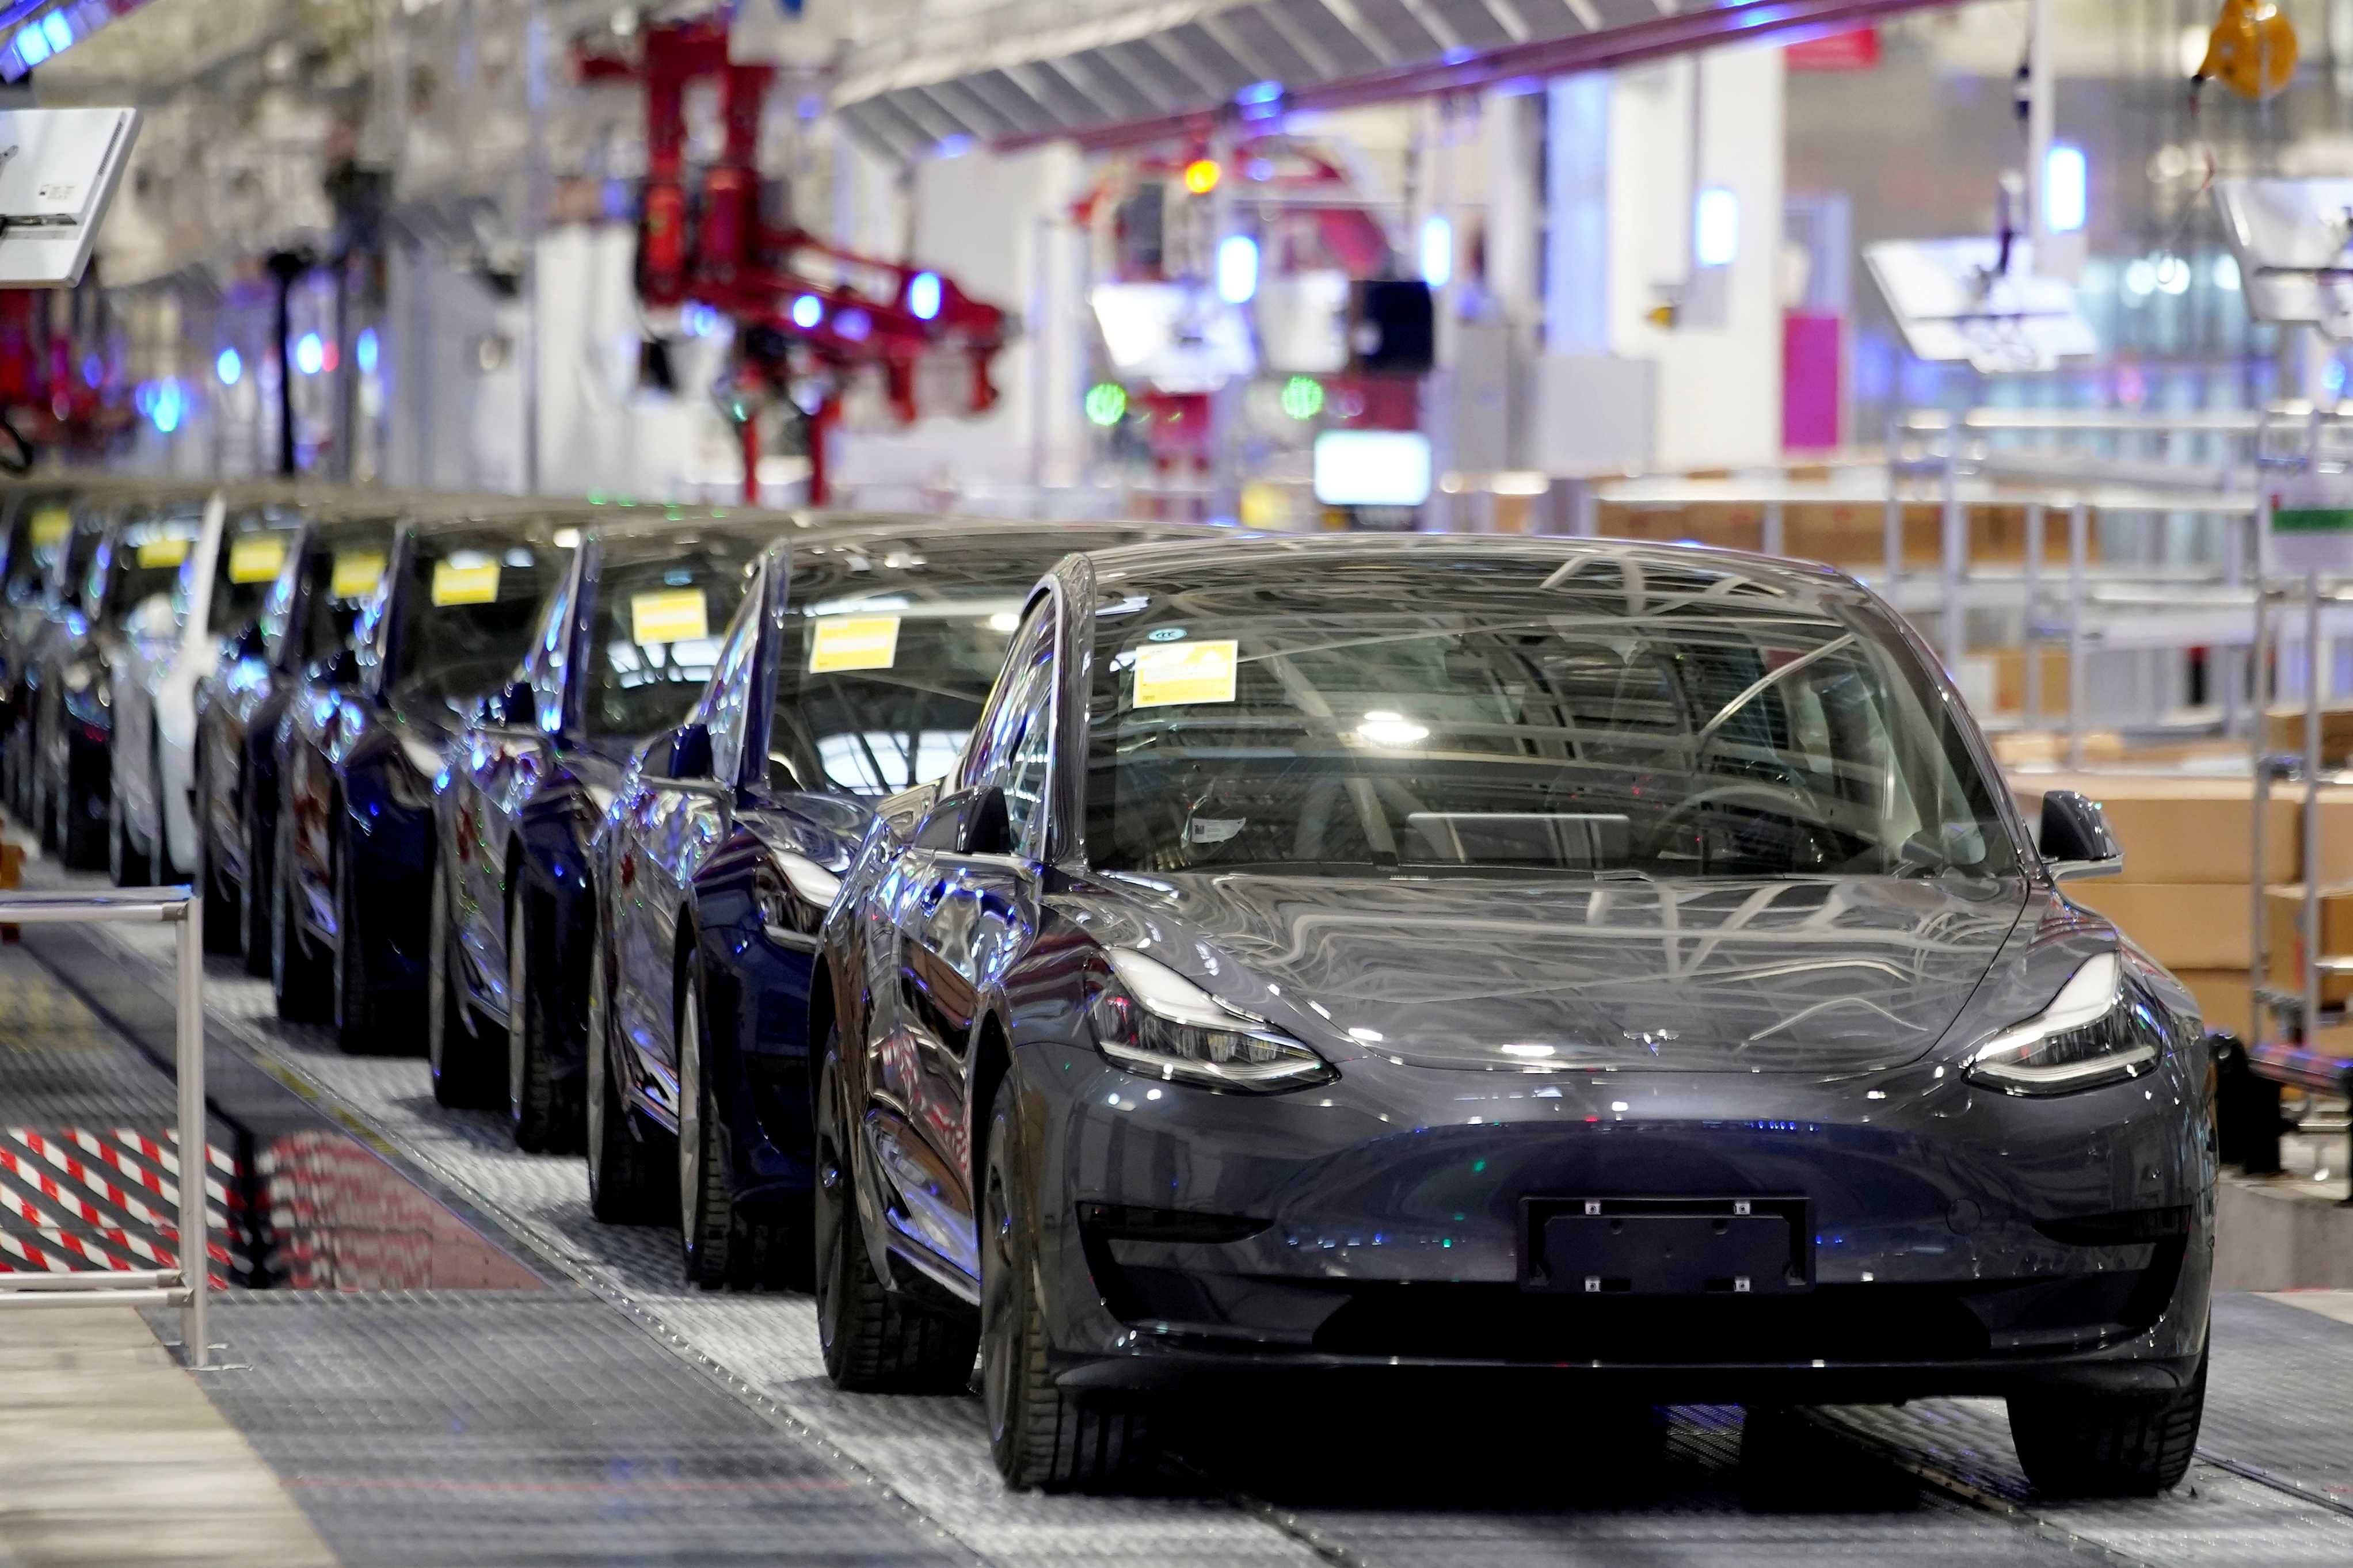 Tesla China-made Model 3 vehicles are seen during a delivery event at its factory in Shanghai. (Credit: Reuters)